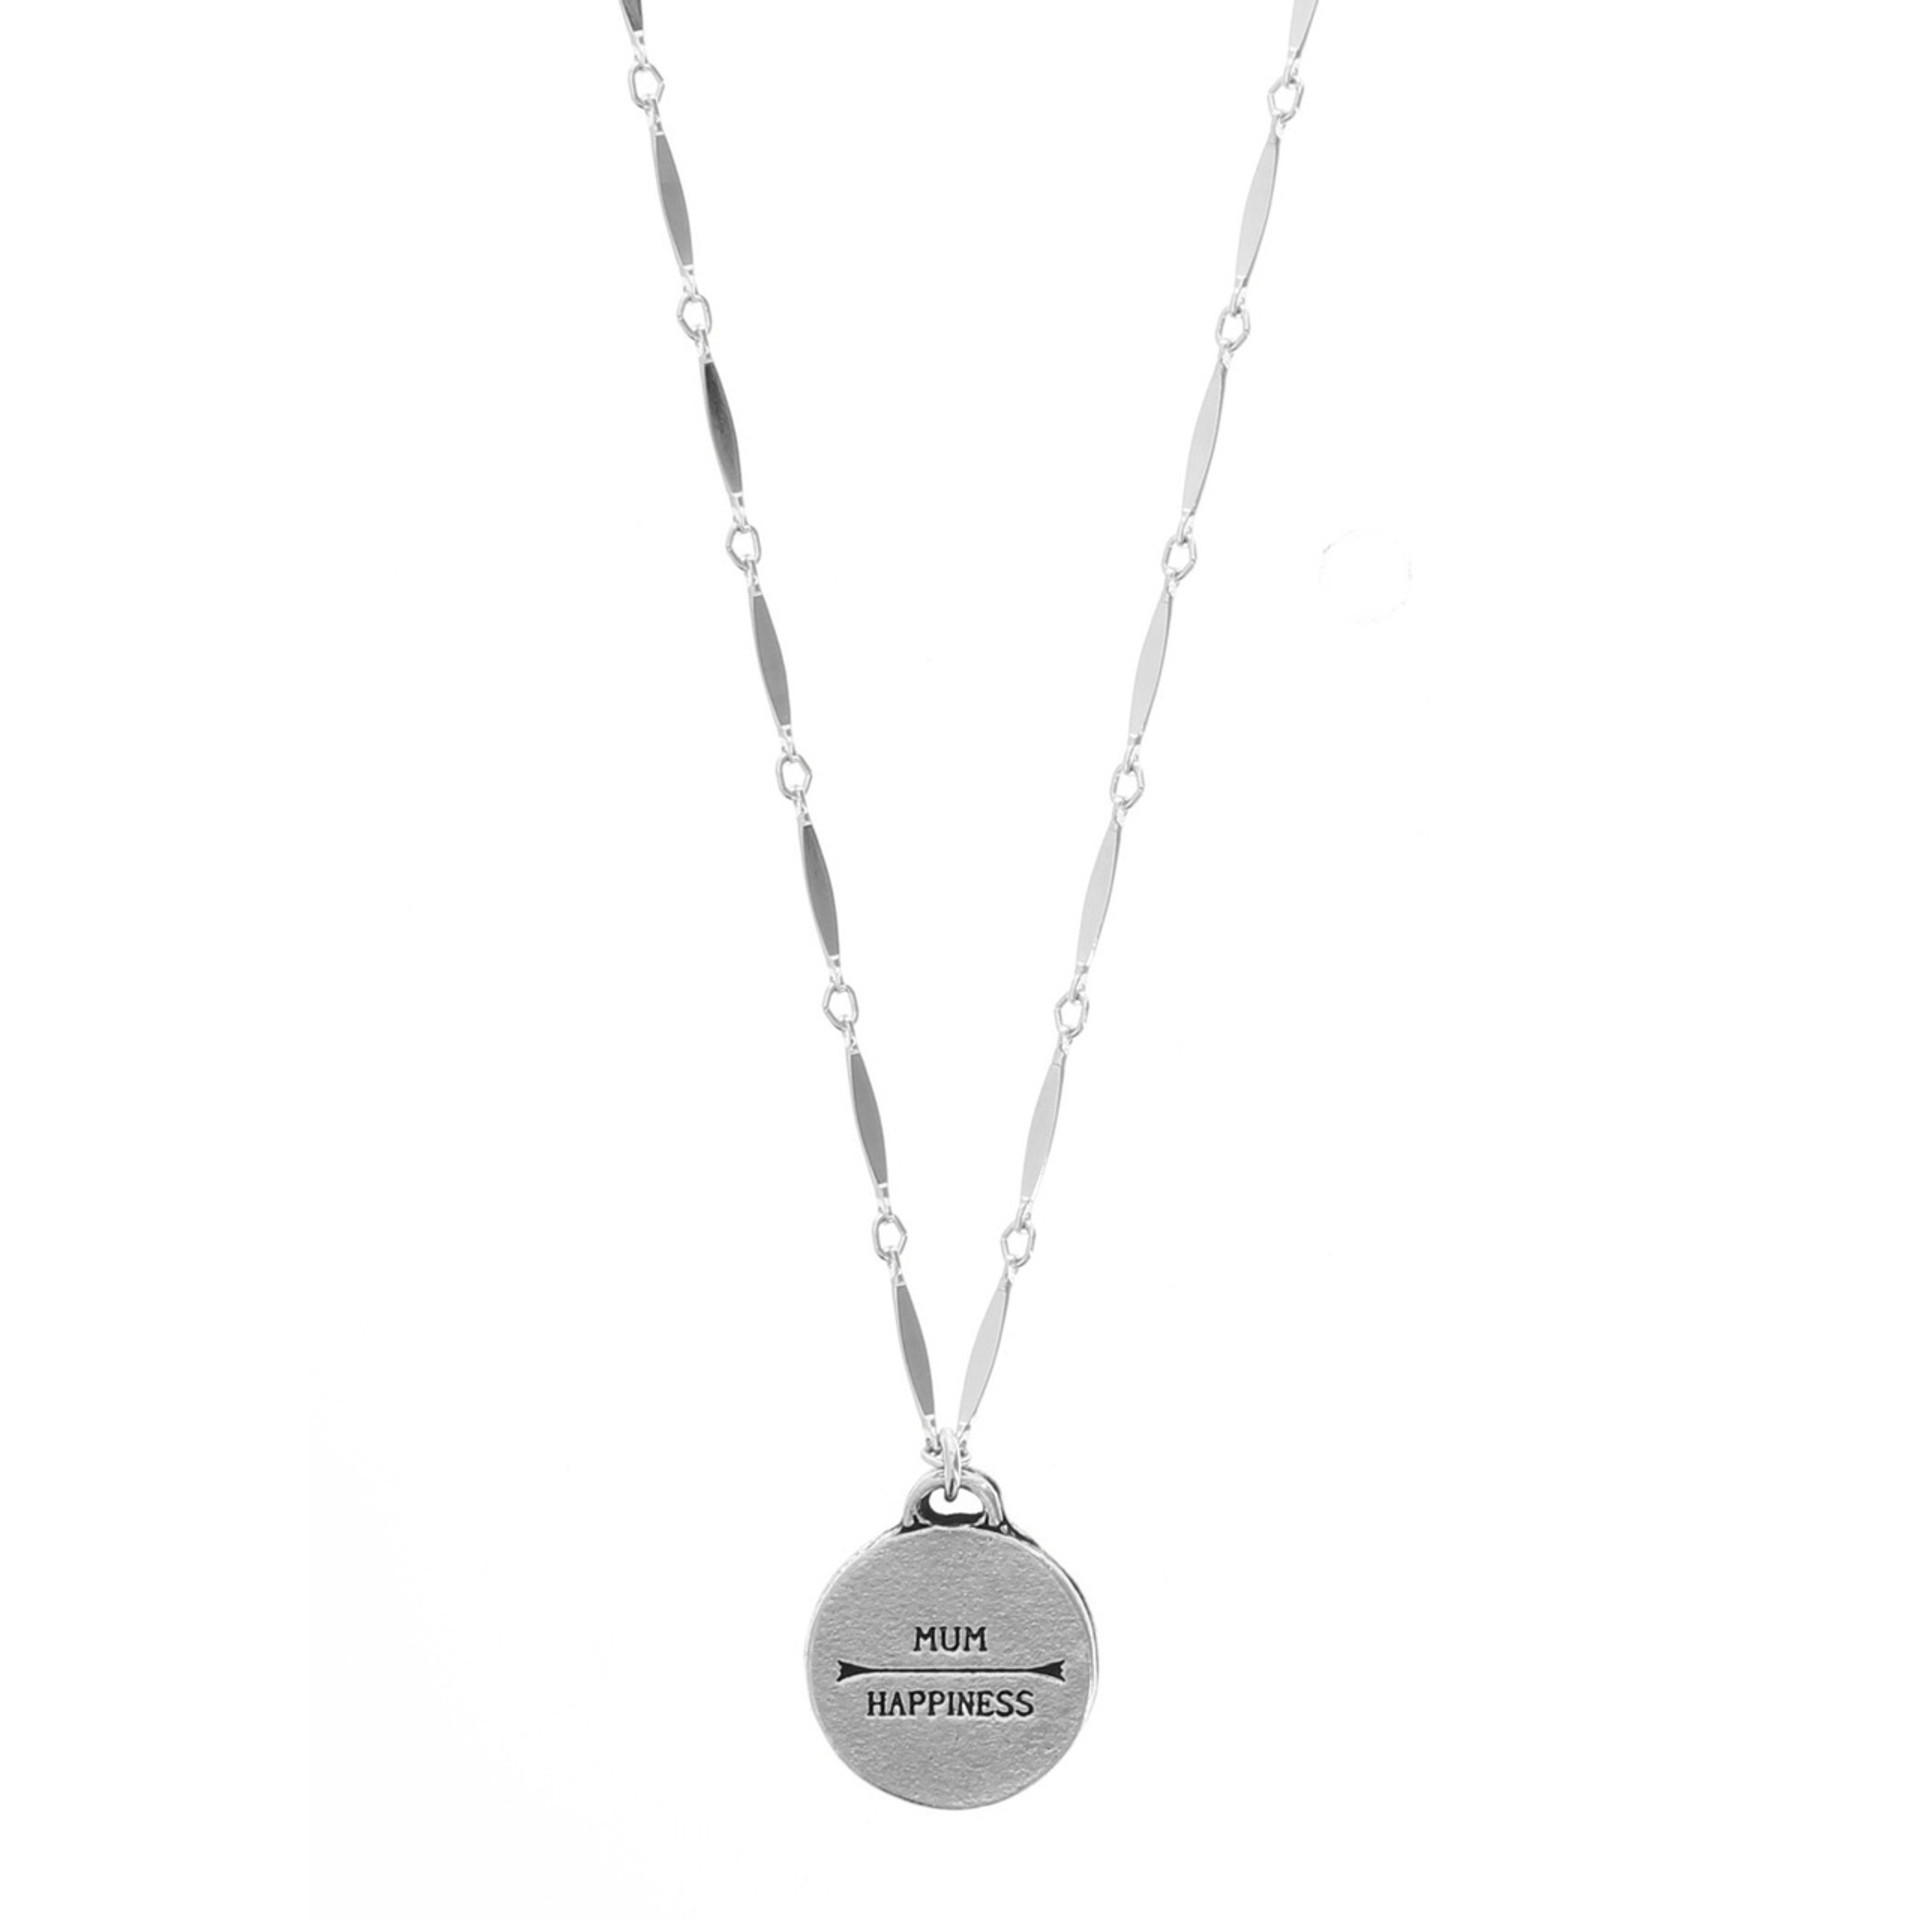 Mum Happiness Necklace